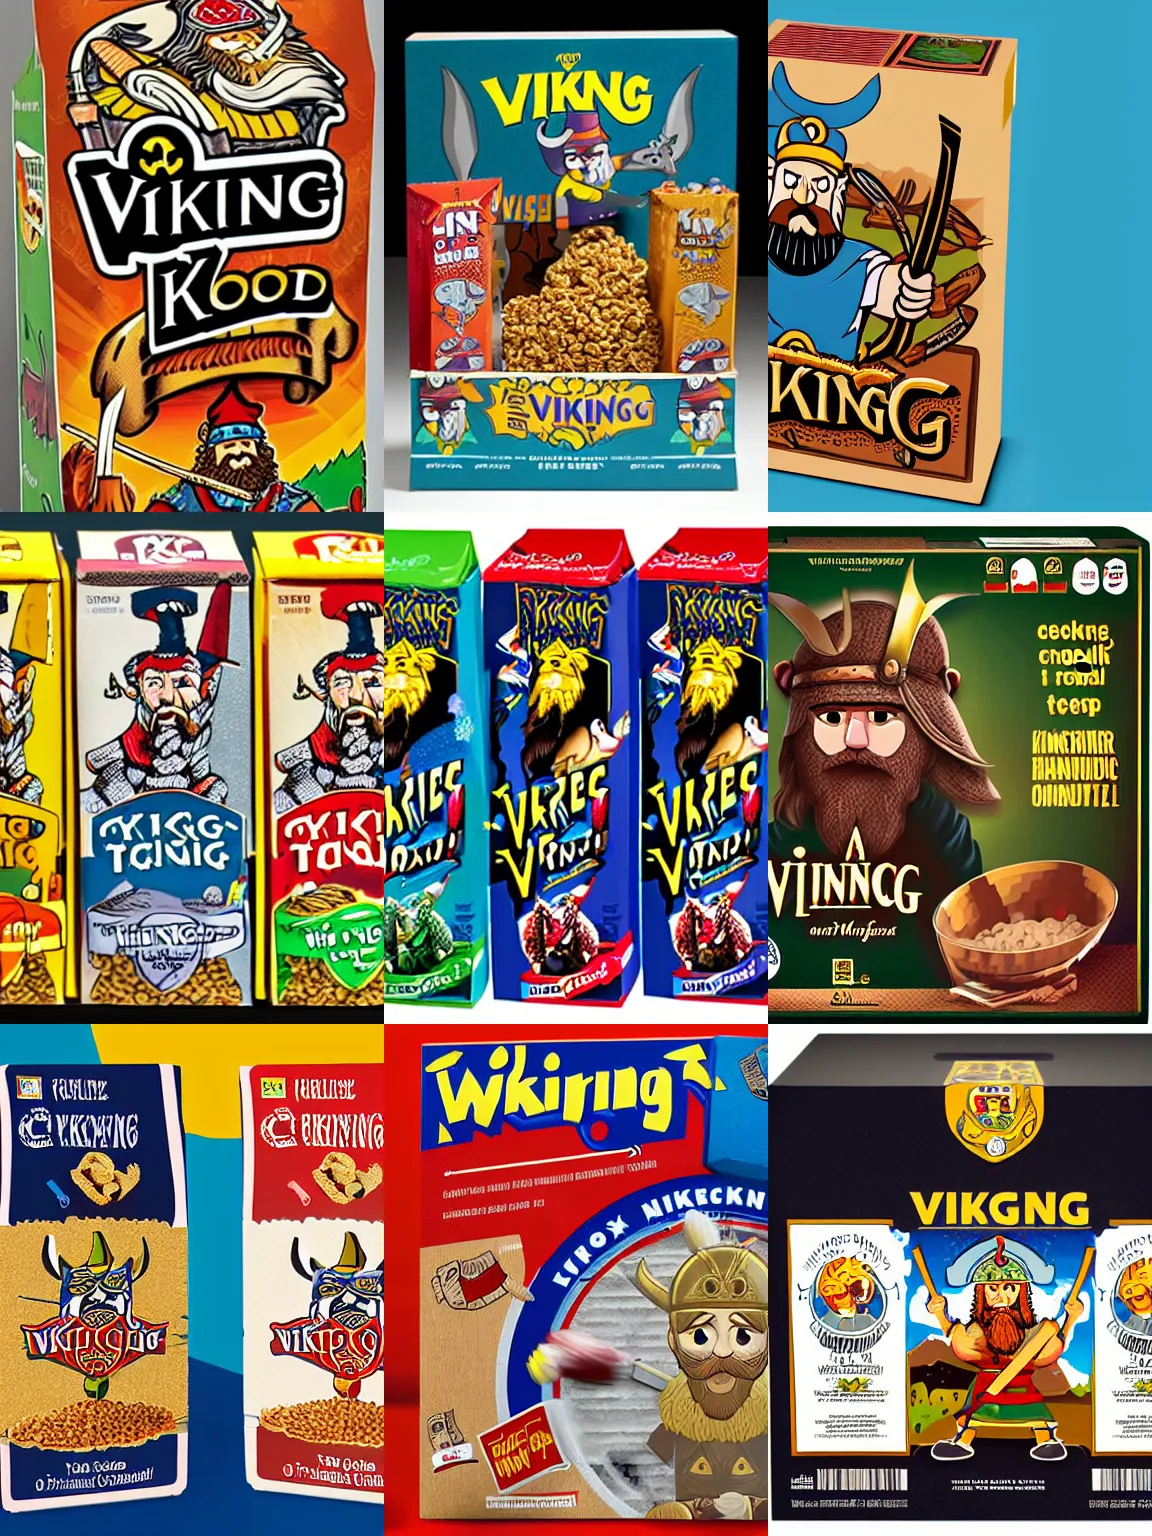 Prompt: a box of viking cereal featuring mascot erik the viking, graphic design, product packaging